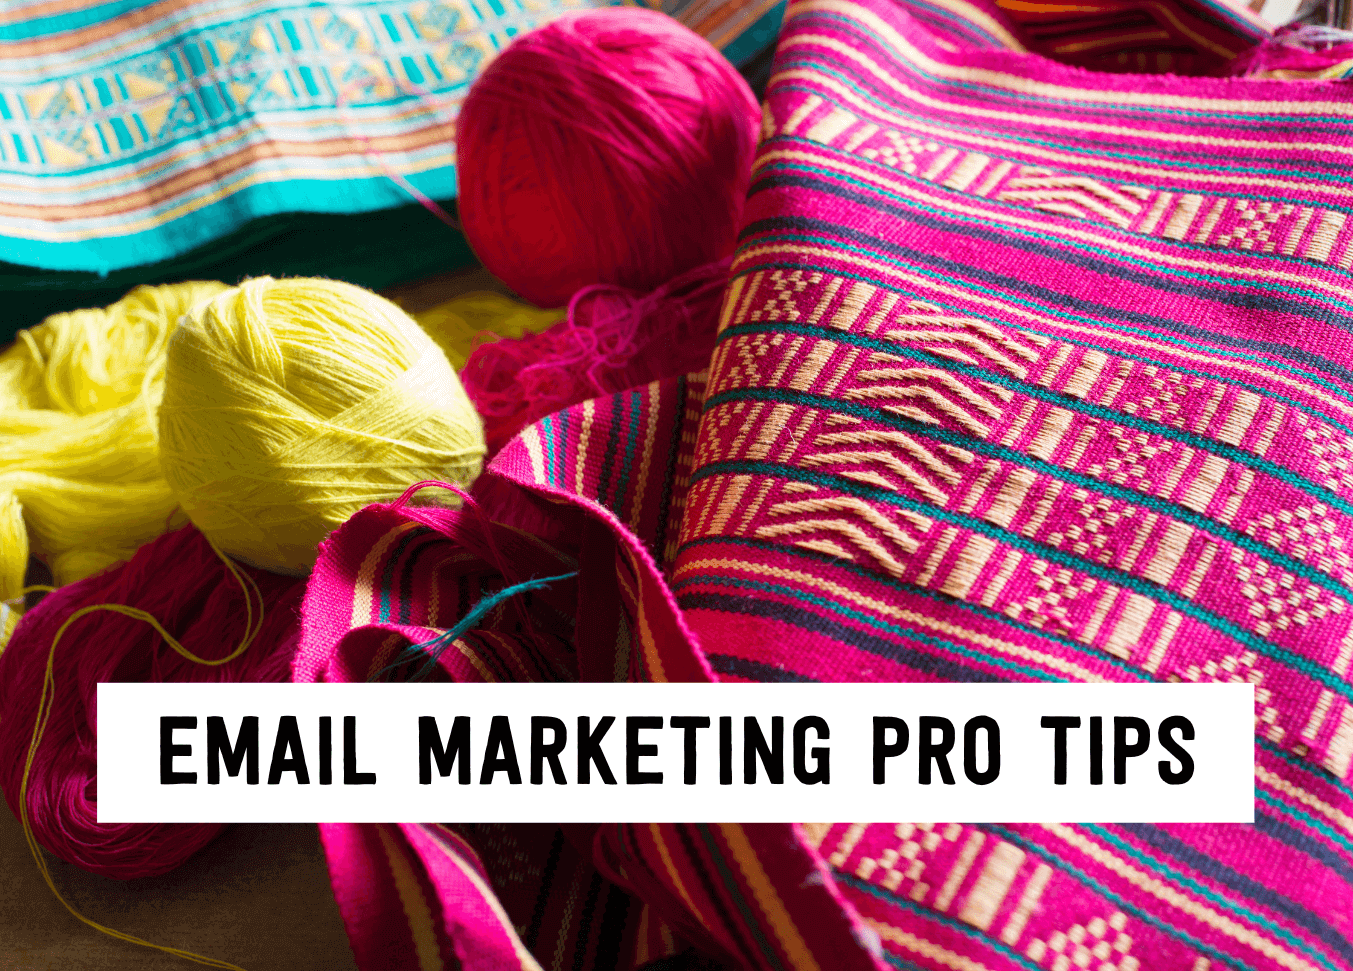 Email marketing pro tips | Tizzit.co - start and grow a successful handmade business